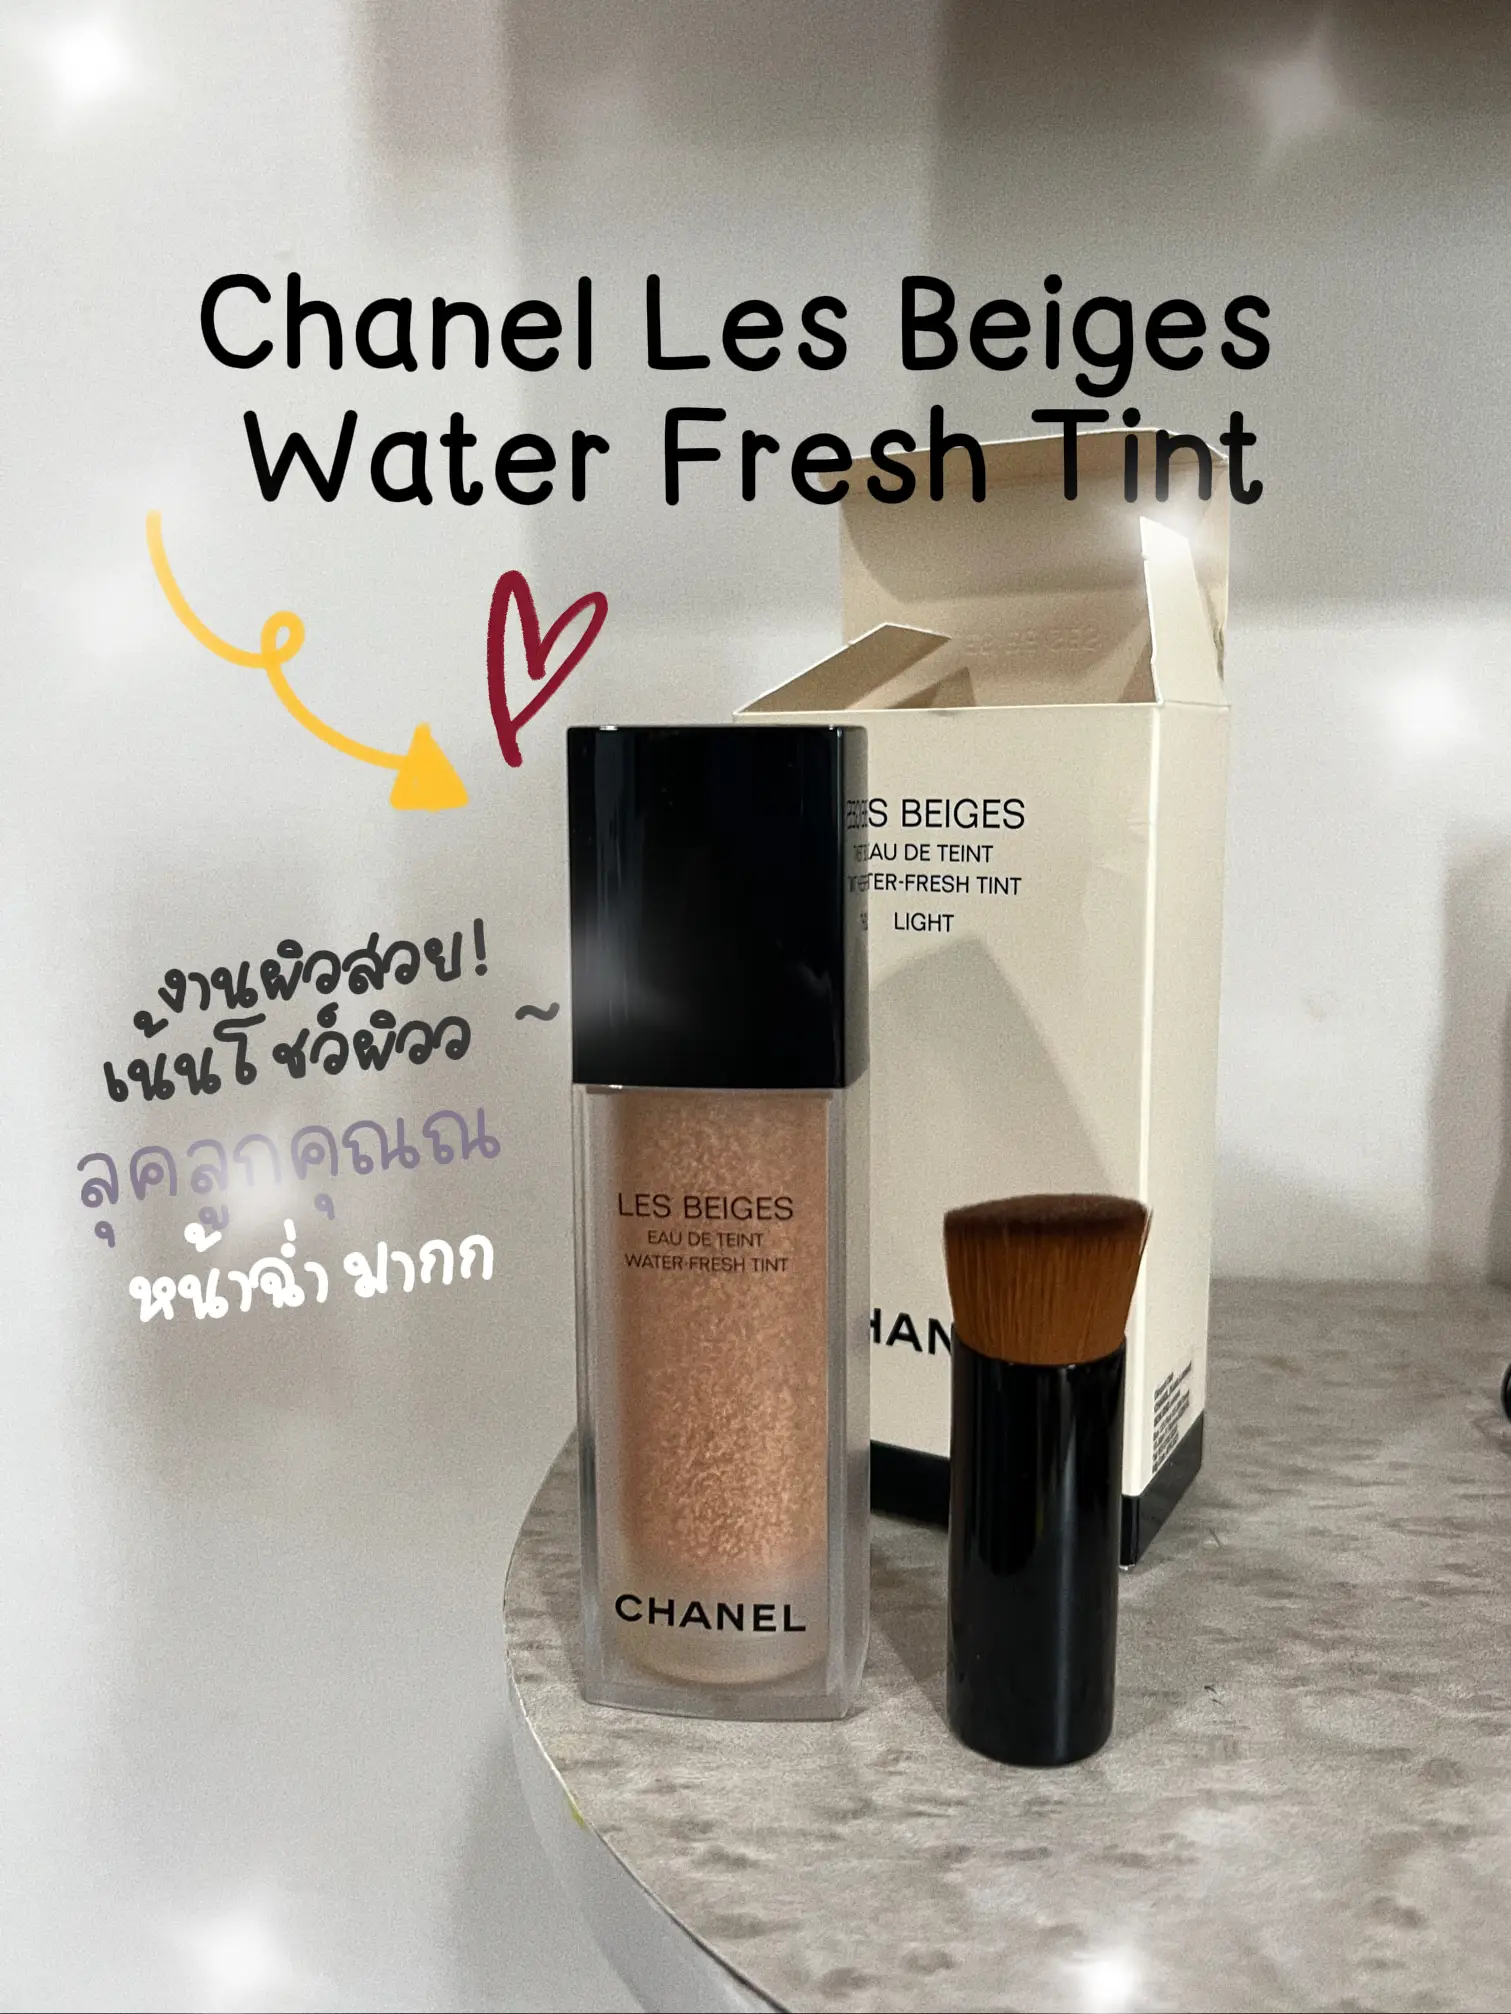 No-miss Skin Show Line! Chanel Les Beiges Water Fresh Tin, Gallery posted  by อาหยก 📸